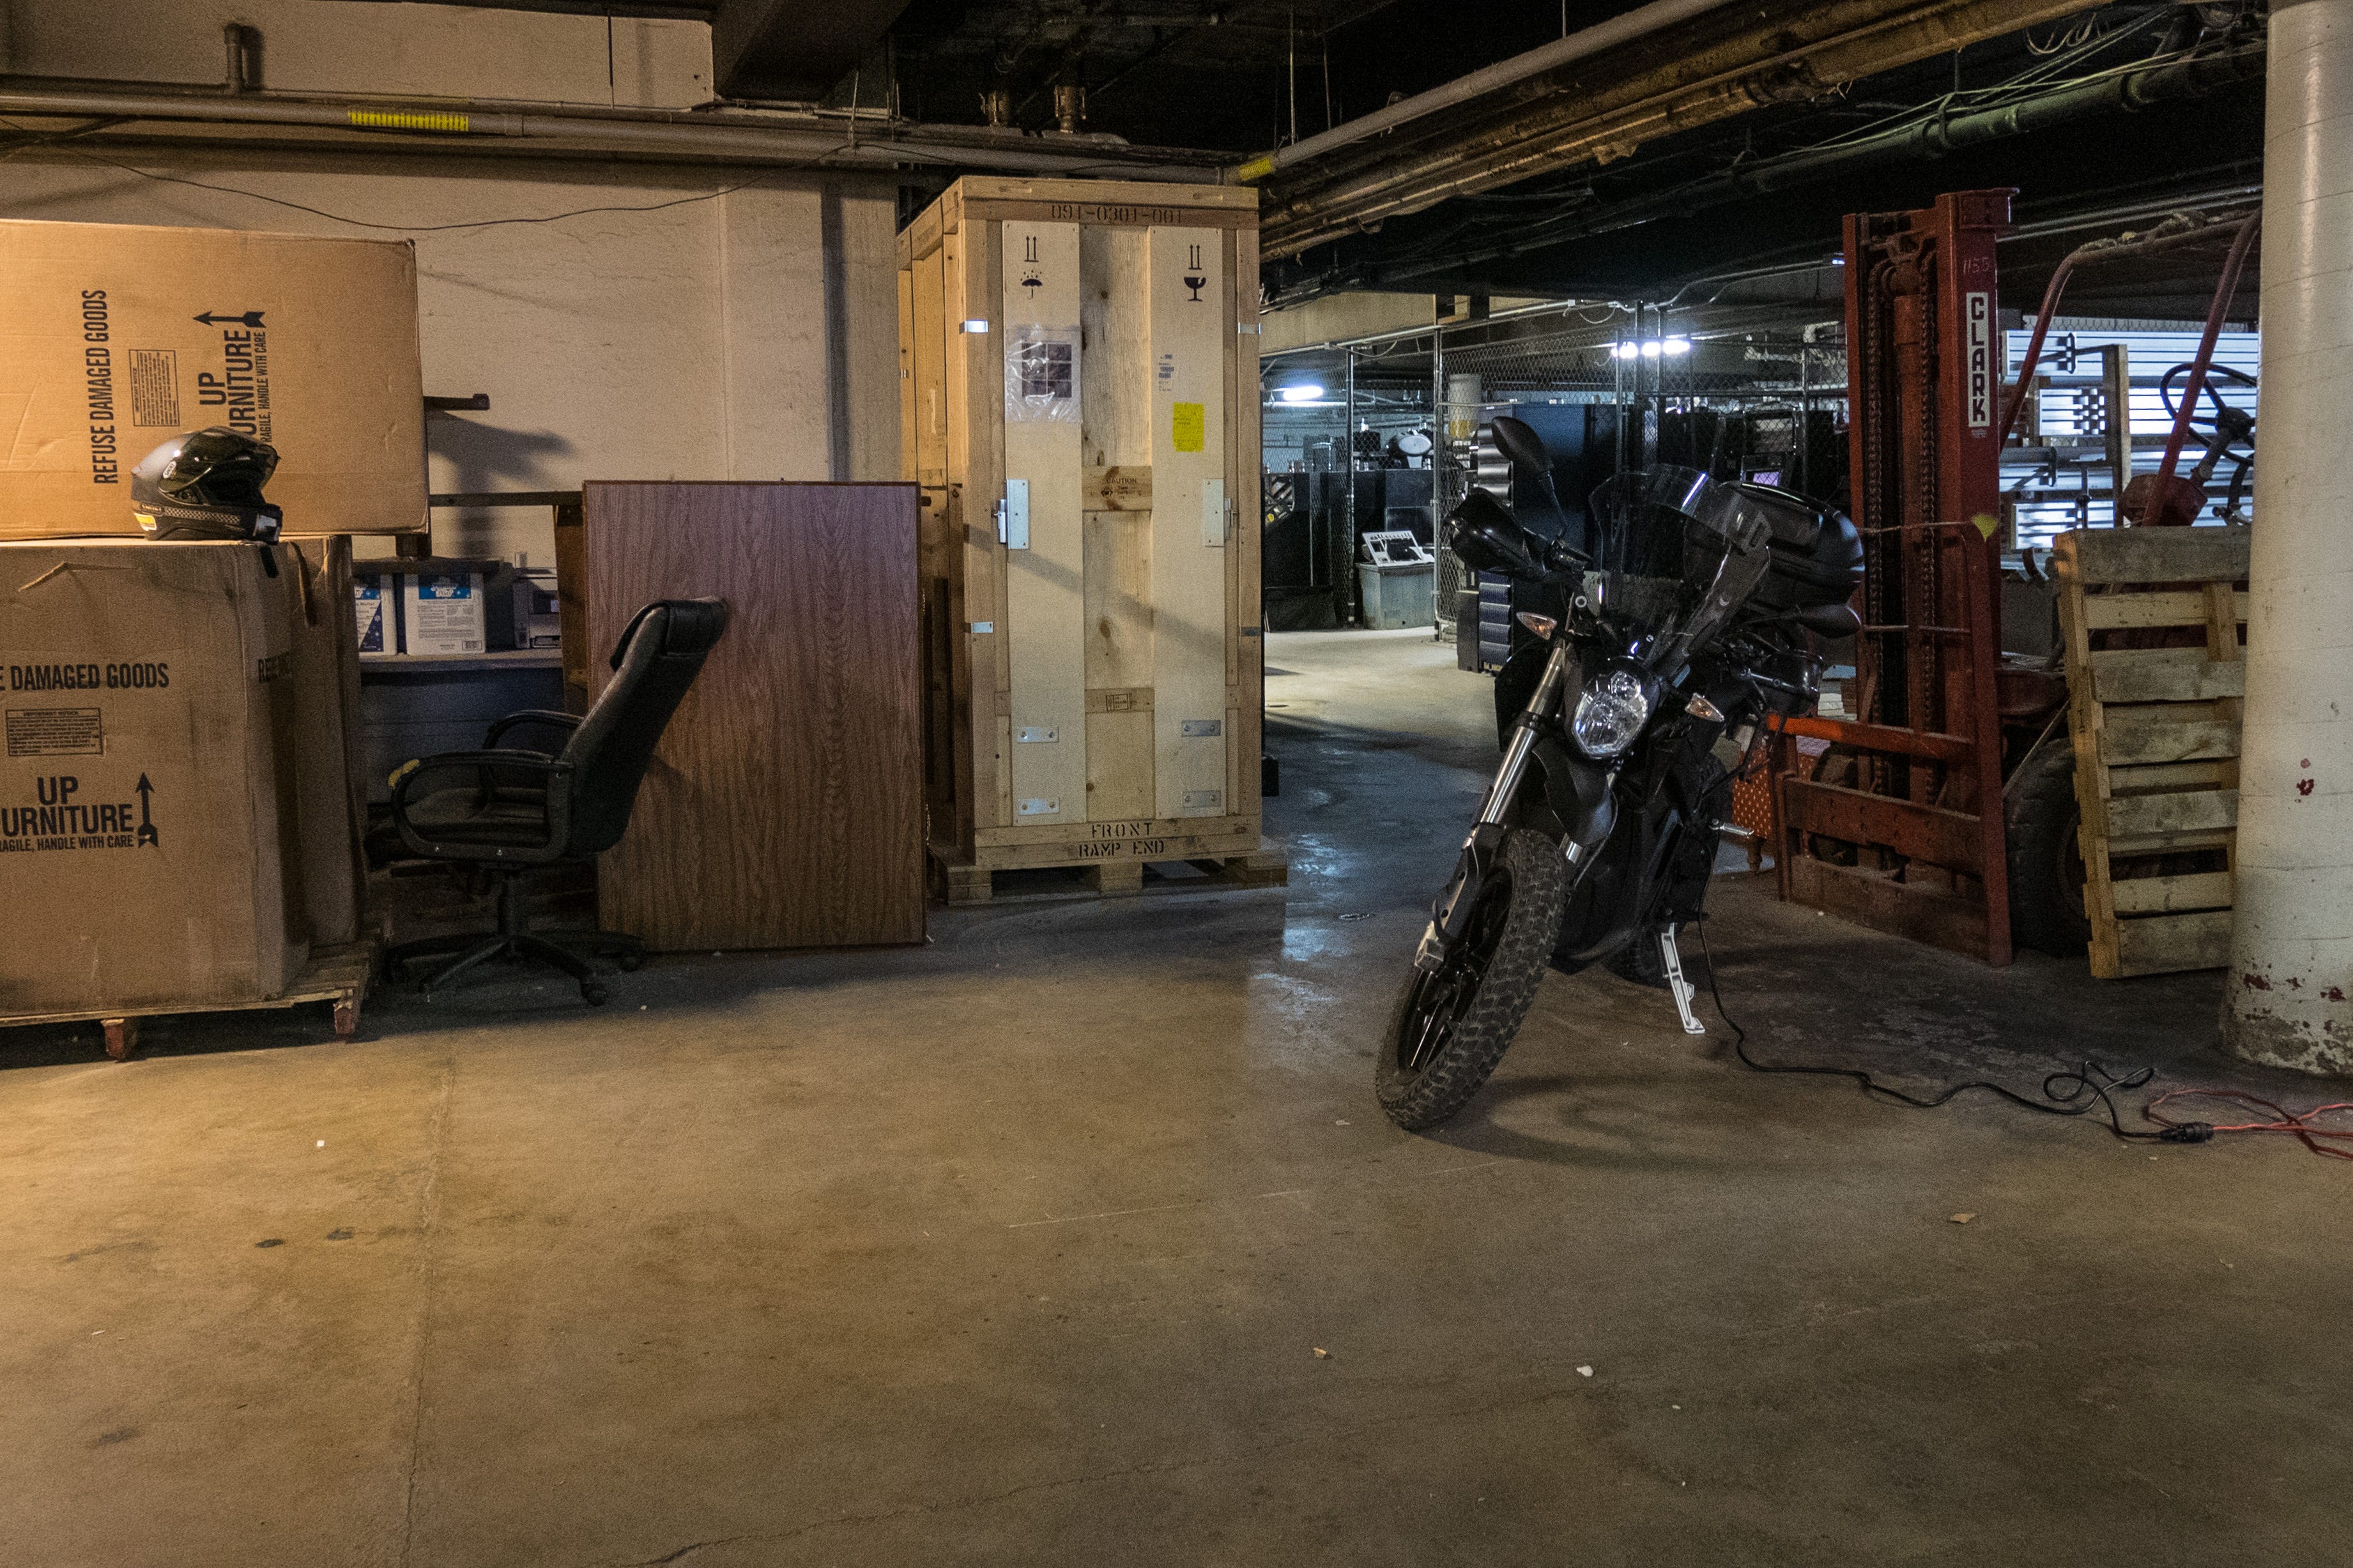 An electric motorcycle sits parked in a low-ceilinged storage area, an extension cord running from the motorcycle off to the right edge of the photo. Around the motorcycle are random objects - an orange forklift behind the motorcycle, a tall, sturdy crate with fragile icons on it to the left of the bike, old wood-veneer office furniture and an office chair besides that, and large cardboard boxes with the words, "furniture / UP" with corresponding arrows. One of the boxes is laying on it's side. One of the boxes has a motorcycle helmet on it. Beyond, are shipping palettes and various other mechanical objects.